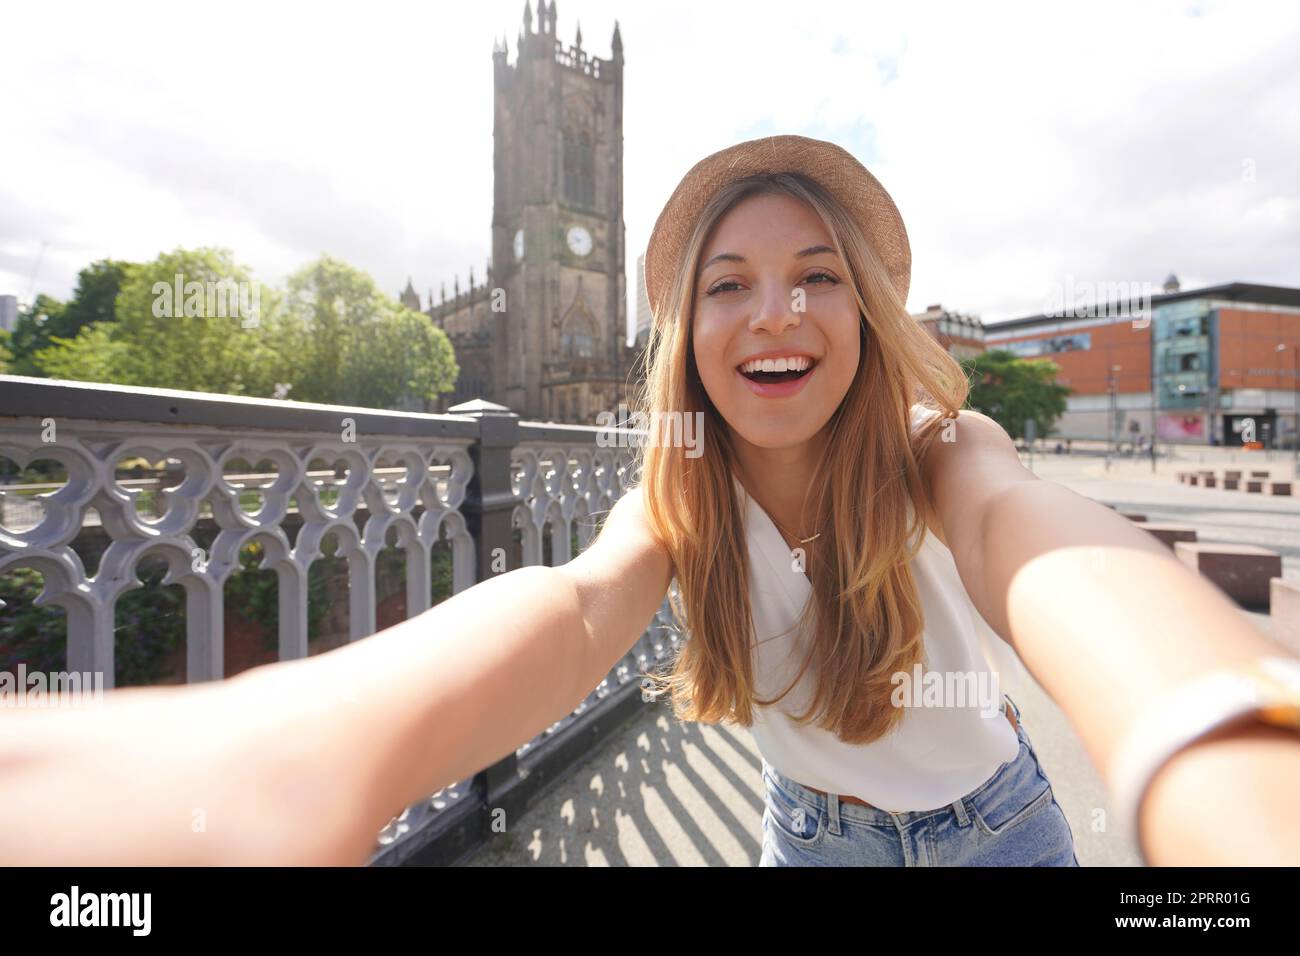 Smiling young woman takes self portrait in Manchester, England, United Kingdom Stock Photo